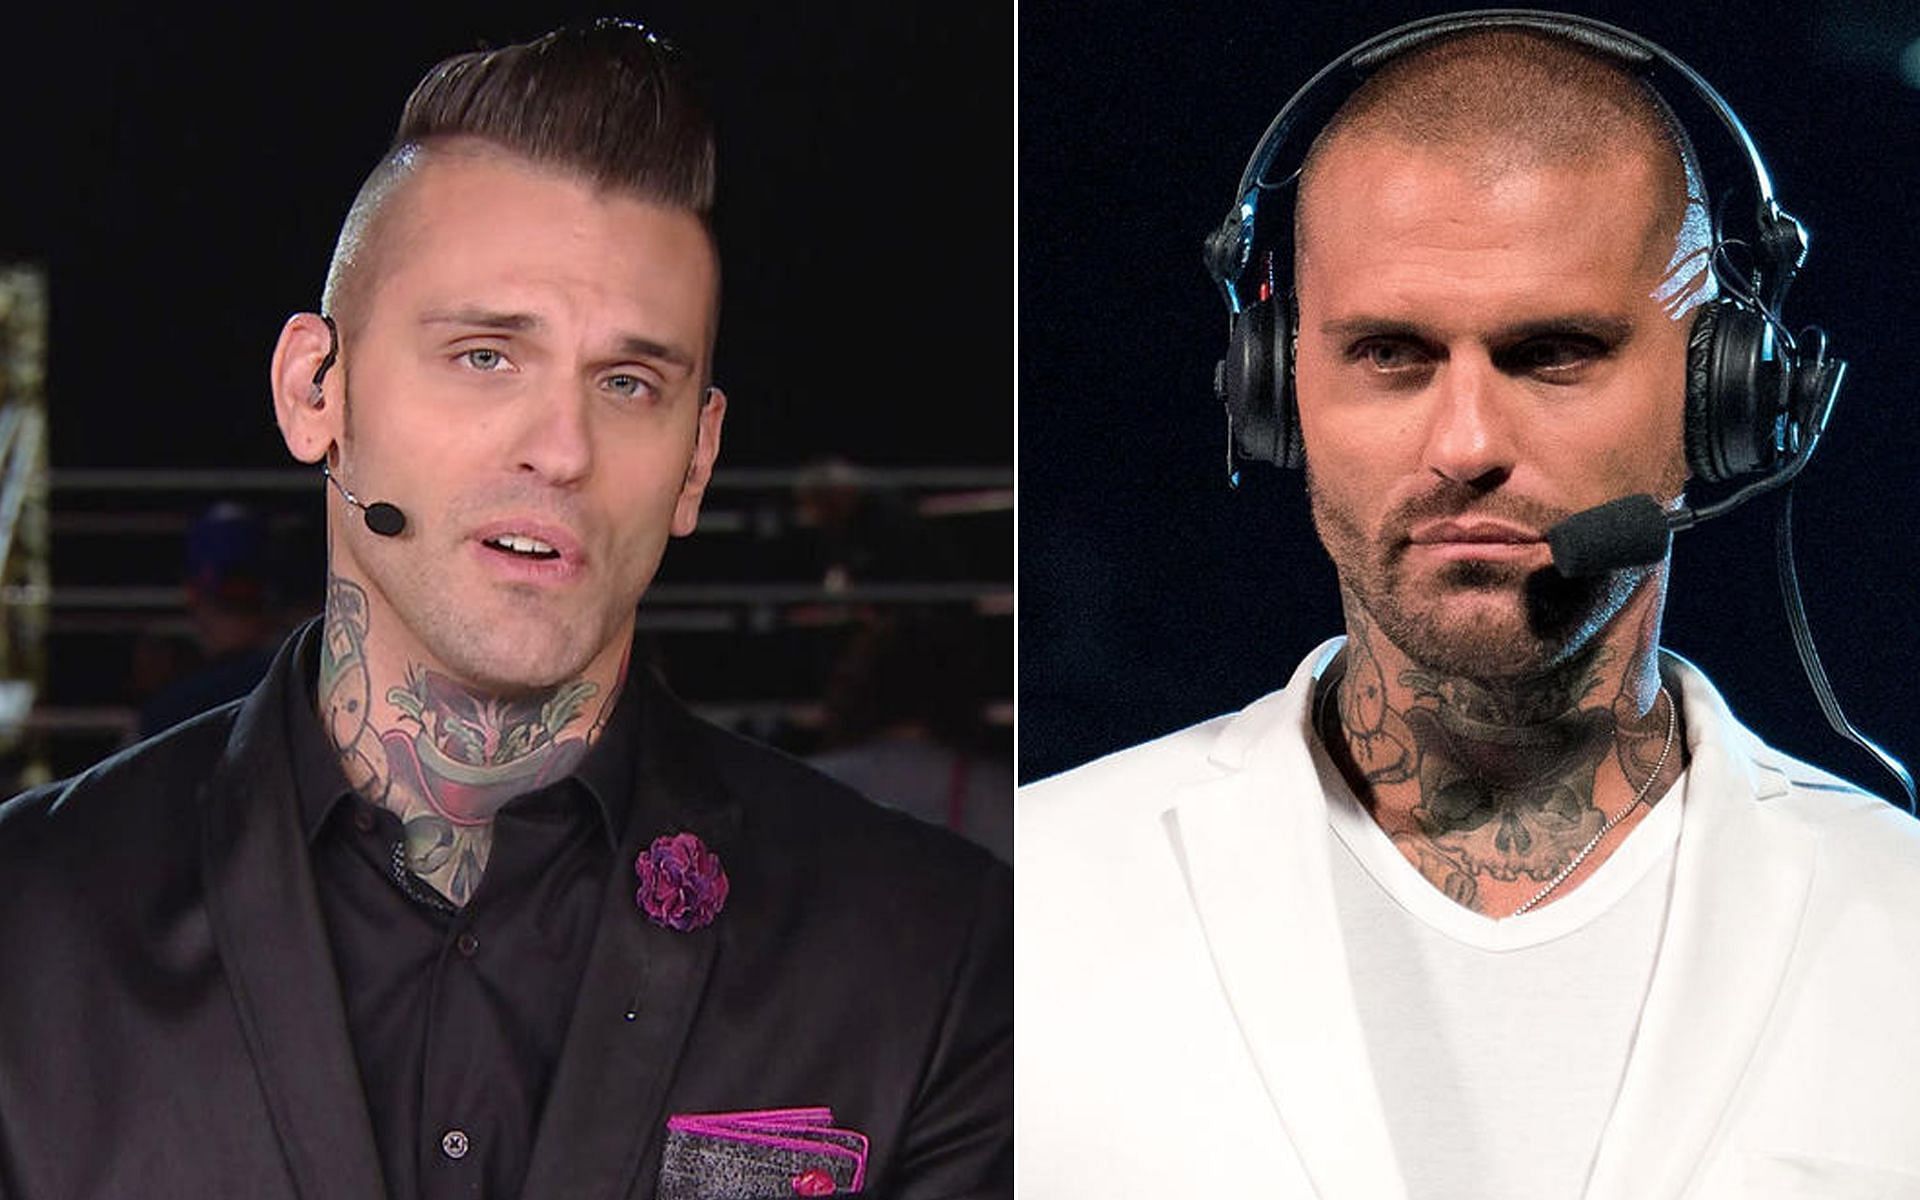 Baron Corbin, Corey Graves, and Ruby Riott Share Personal Stories Behind  Their Tattoos | 411MANIA